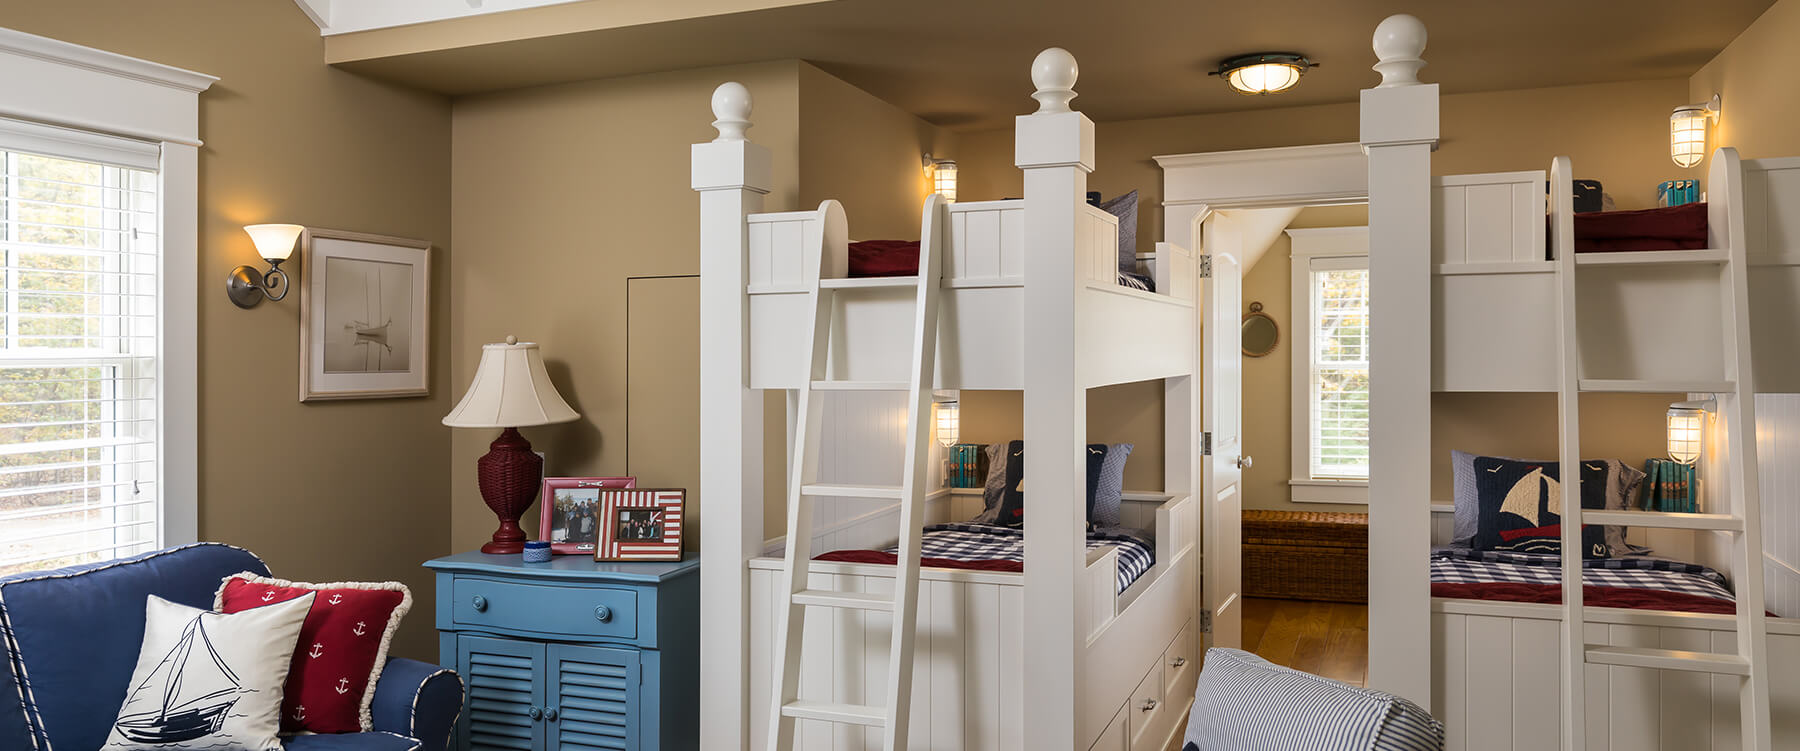 kids bunk bed room at shingle style cottage